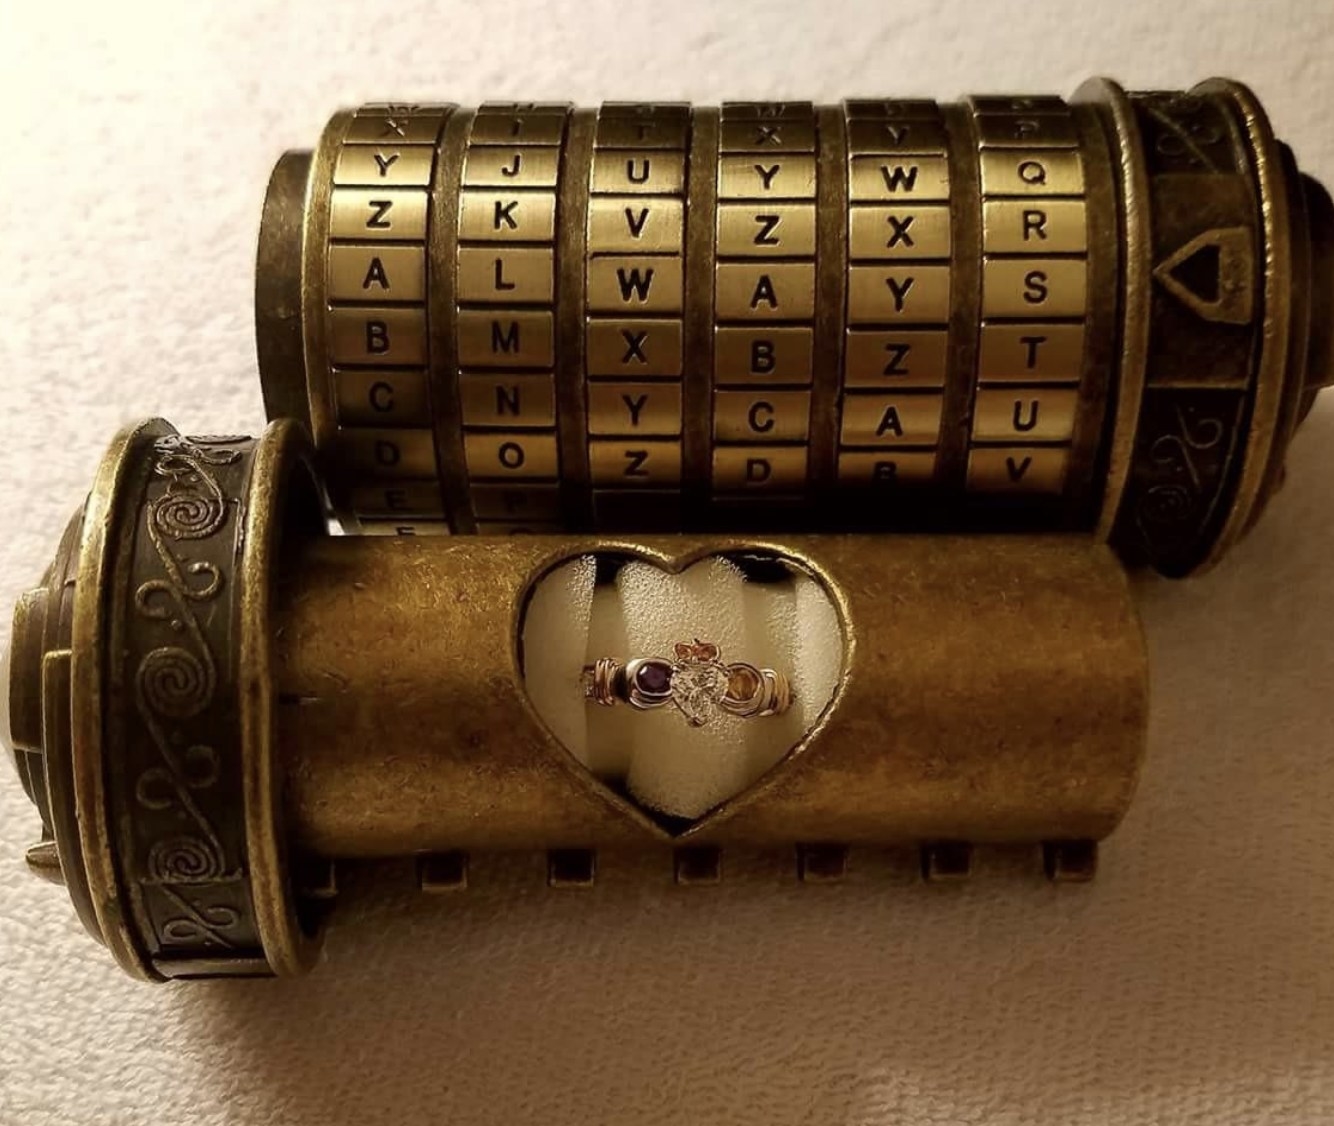 The lock holding a ring inside